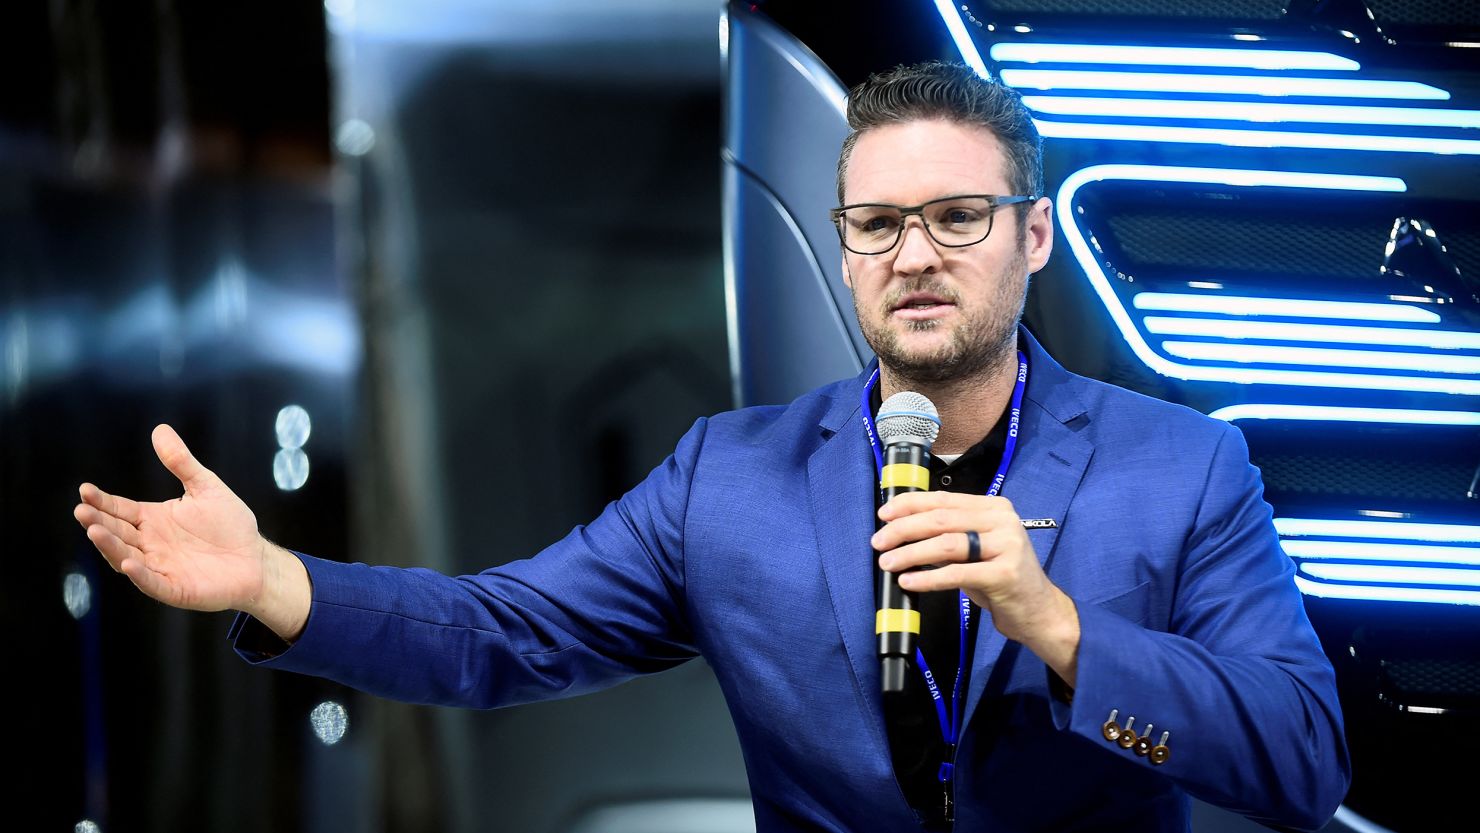 CEO and founder of U.S. Nikola Trevor Milton attends a news conference held to presents its new full-electric and hydrogen fuel-cell battery trucks in partnership with U.S. Nikola, at an event in Turin, Italy, December 3, 2019.